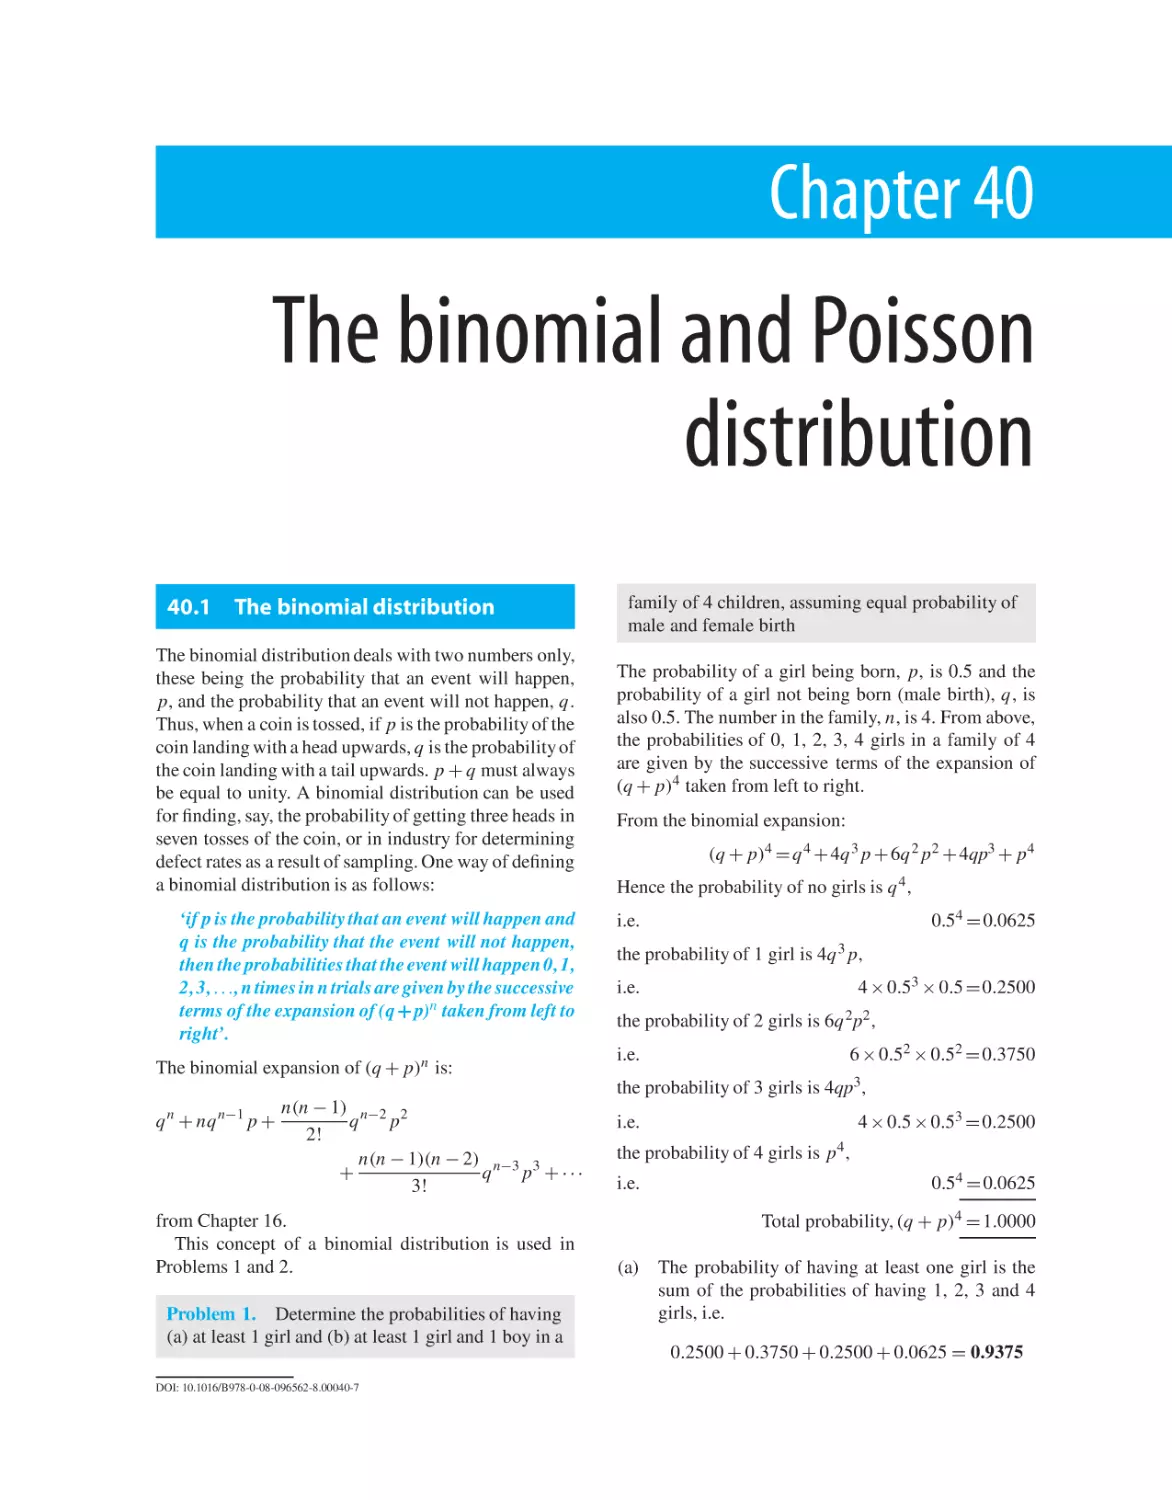 Chapter 40. The binomial and Poisson distributions
40.1 The binomial distribution